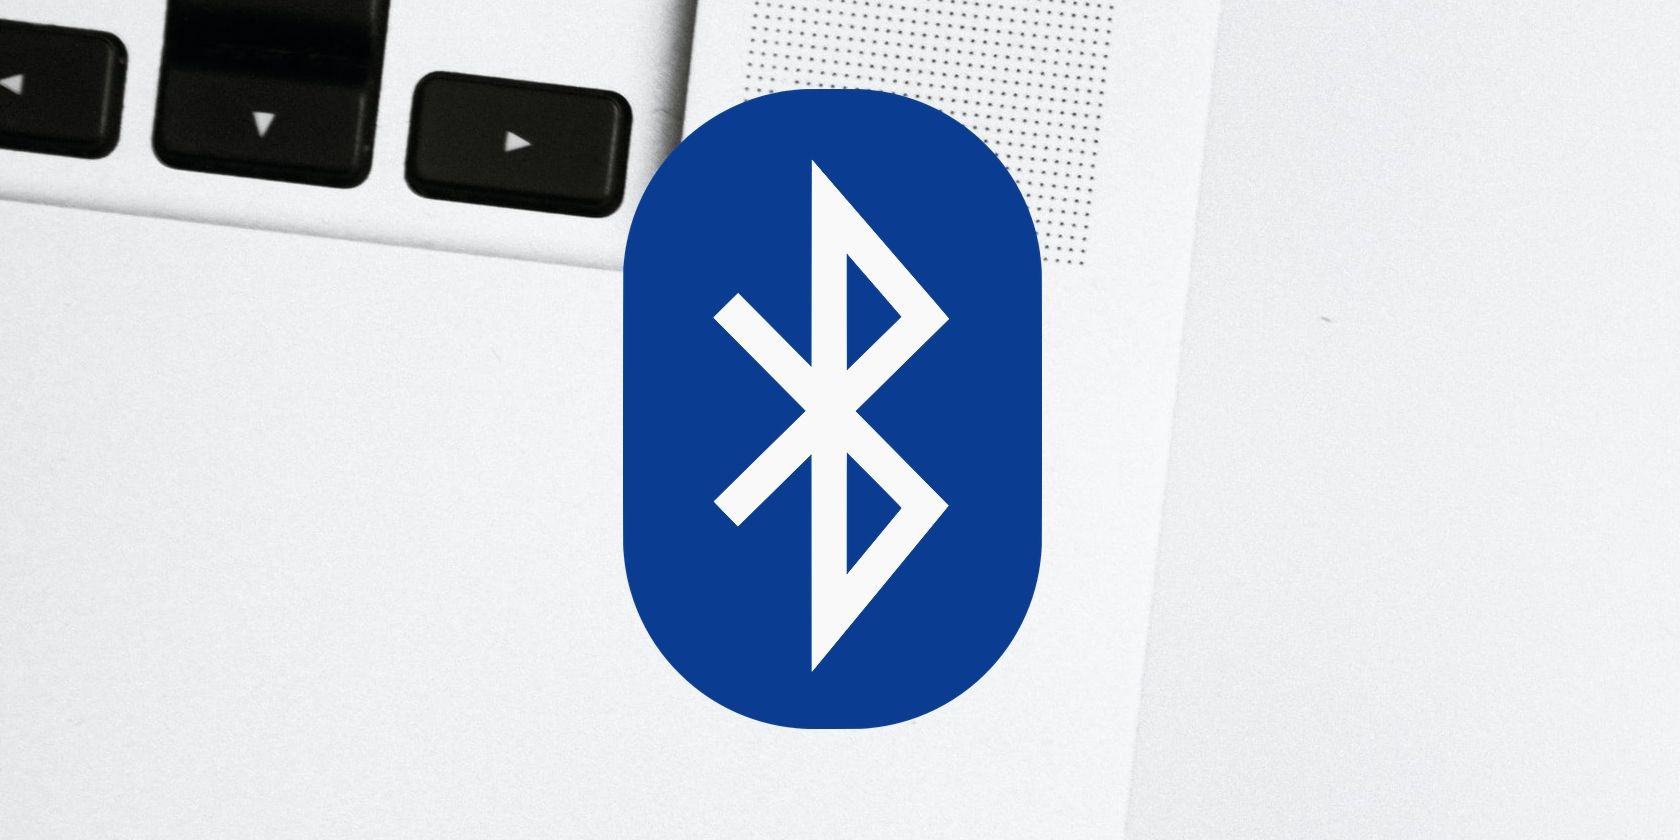 connect android to mac via bluetooth for video